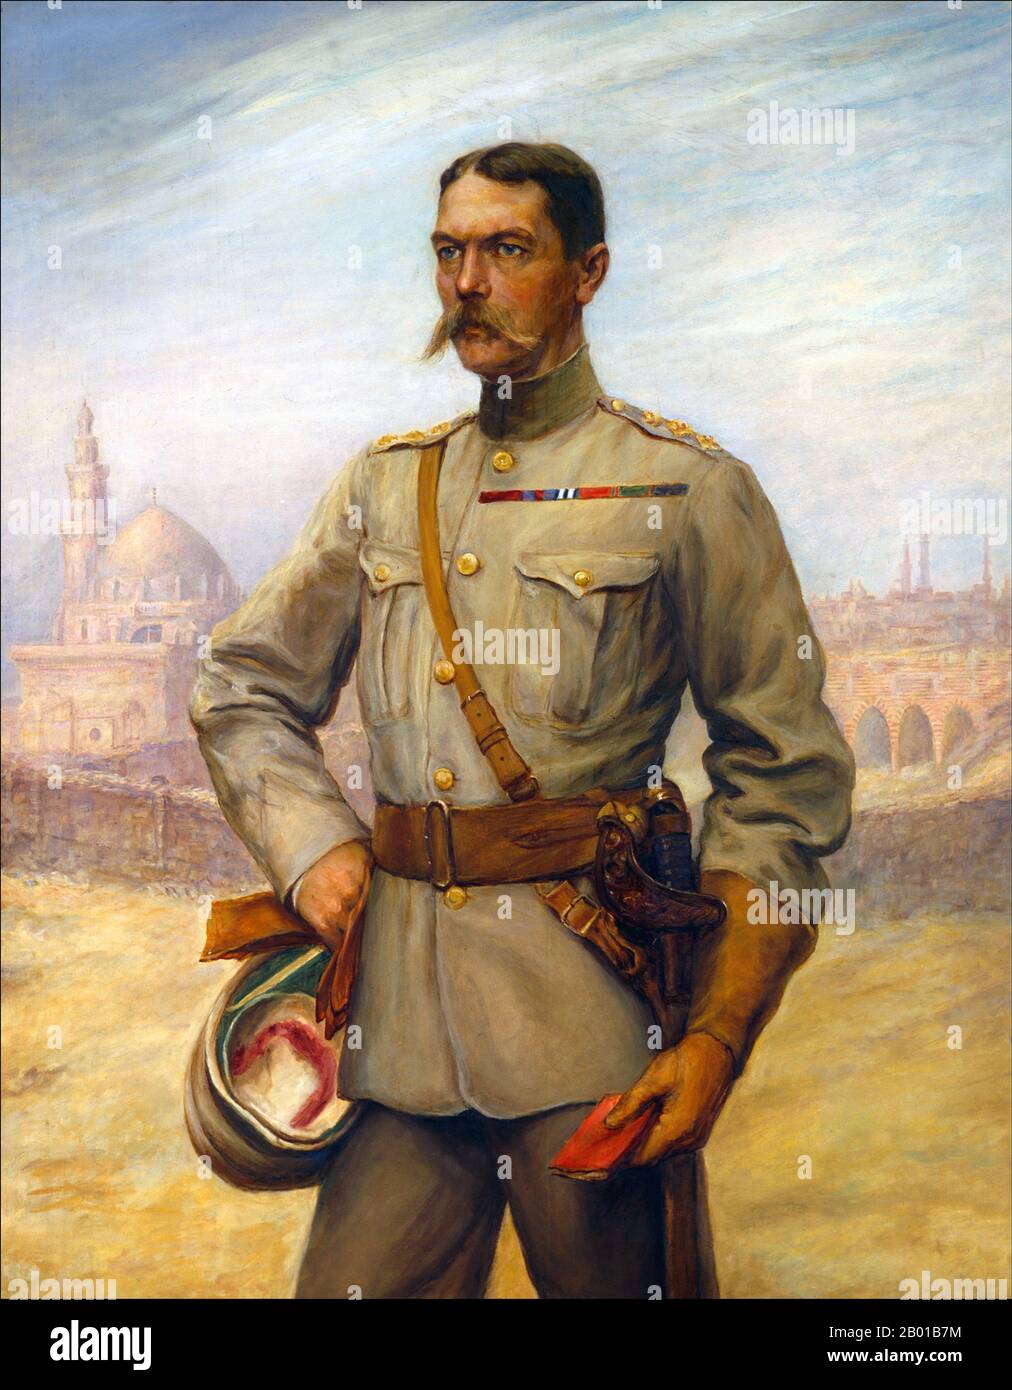 United Kingdom: Field Marshal Horatio Herbert Kitchener, 1st Earl Kitchener KG, KP, GCB, OM, GCSI, GCMG, GCIE, ADC, PC (24 June 1850 - 5 June 1916), Irish-born British Field Marshal, patriot and arch imperialist. Oil on canvas painting by Florence Woodruffe (fl. early 20th century), 1925.  Kitchener won fame in 1898 for winning the Battle of Omdurman and securing control of the Sudan, after which he was given the title 'Lord Kitchener of Khartoum'. As Chief of Staff (1900-1902) in the second Boer war he played a key role in Lord Roberts' conquest of the Boer Republics. Stock Photo